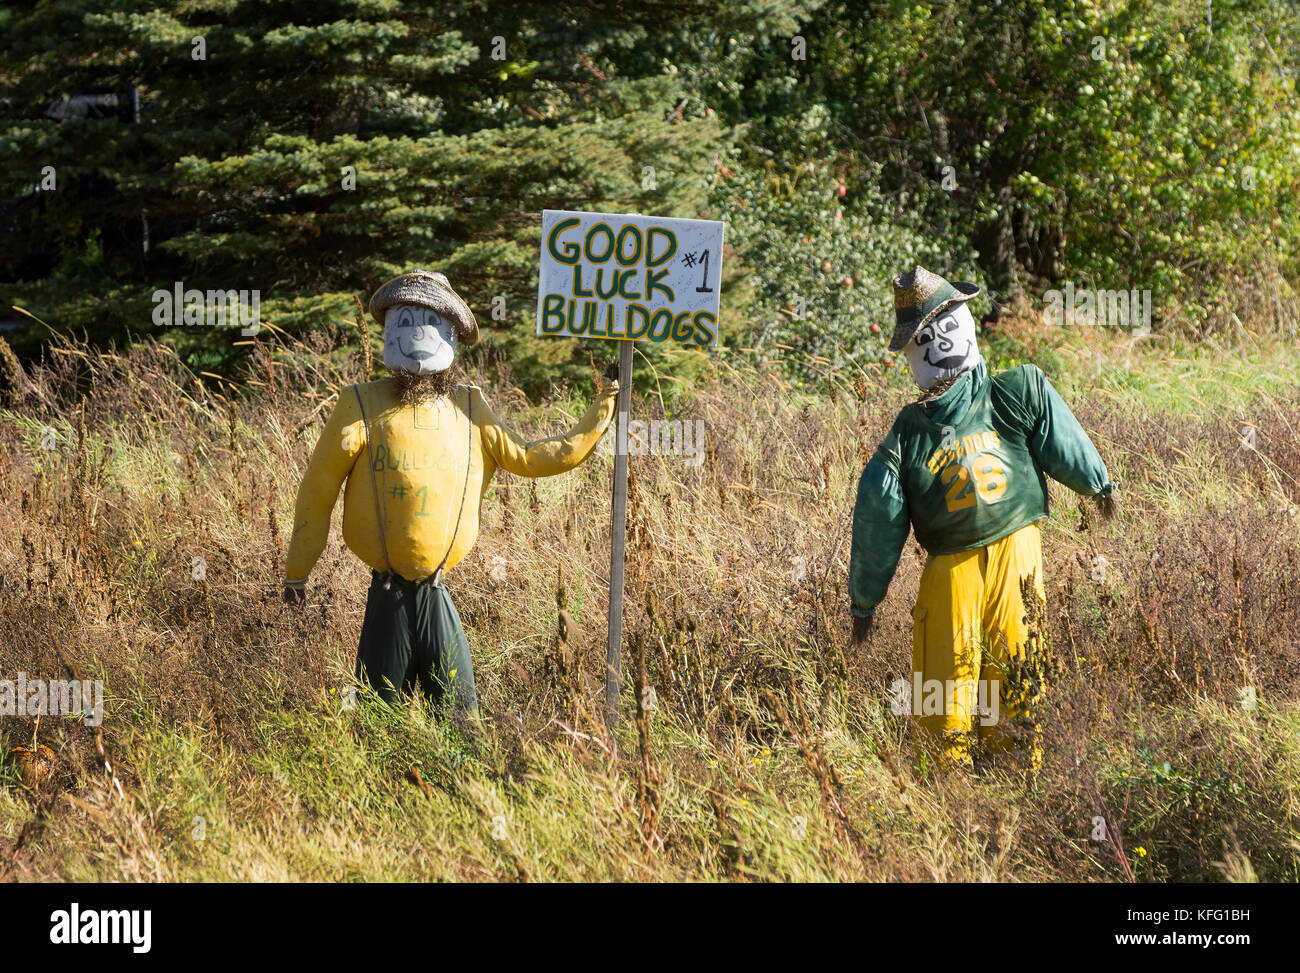 A pair or scarecrows on a farm near Manchester, Vermont seem to be cheering for the local team Stock Photo